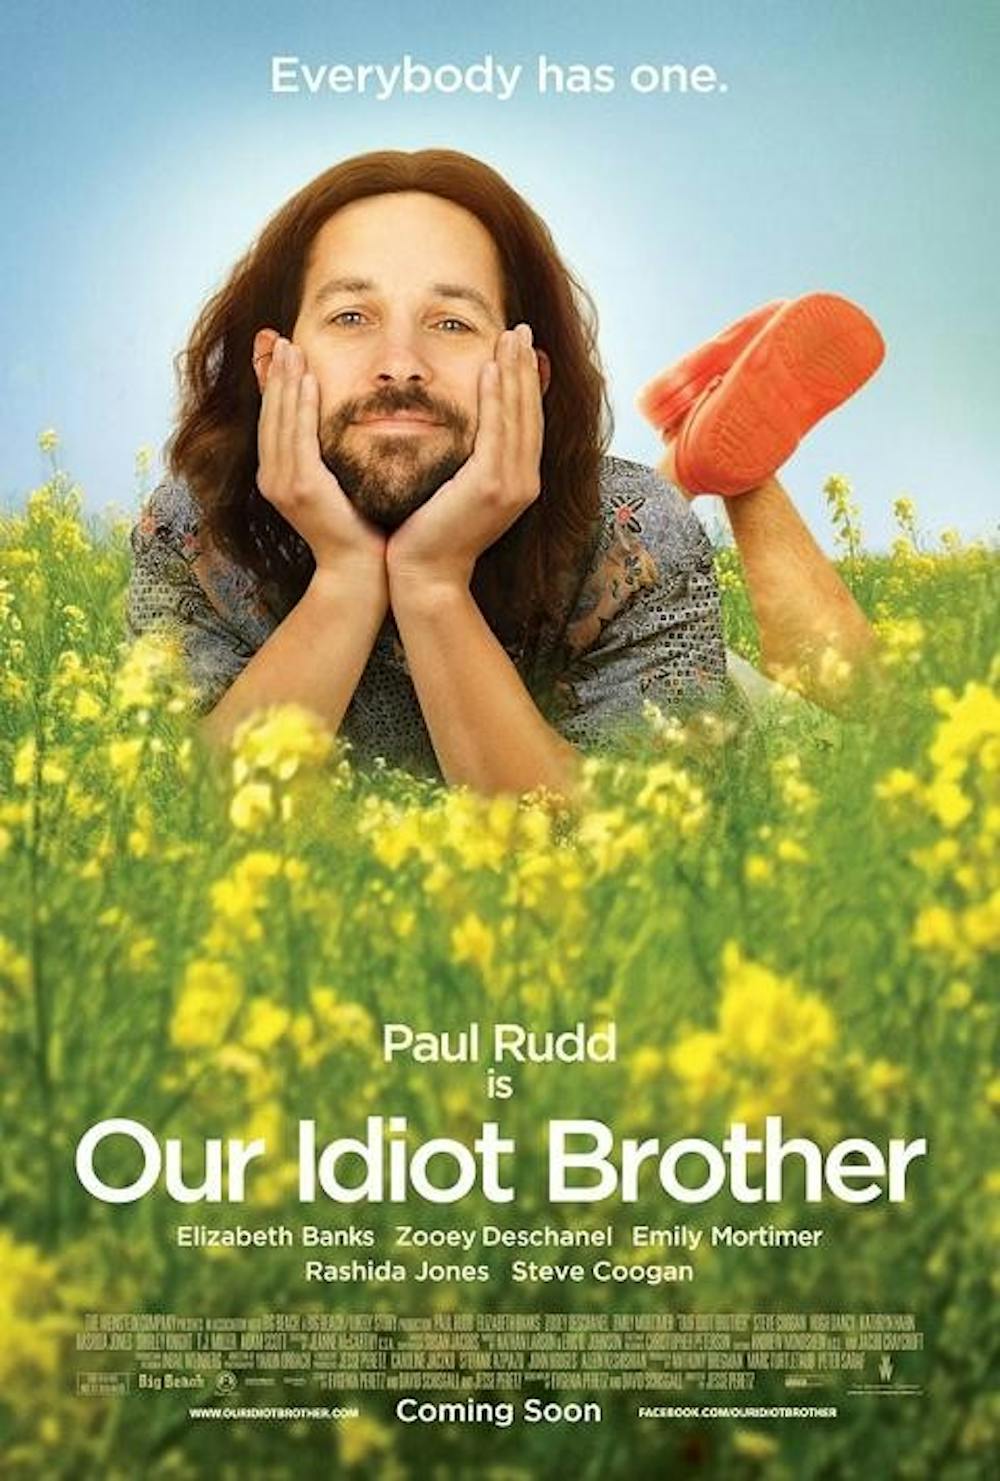 Idiot Brother